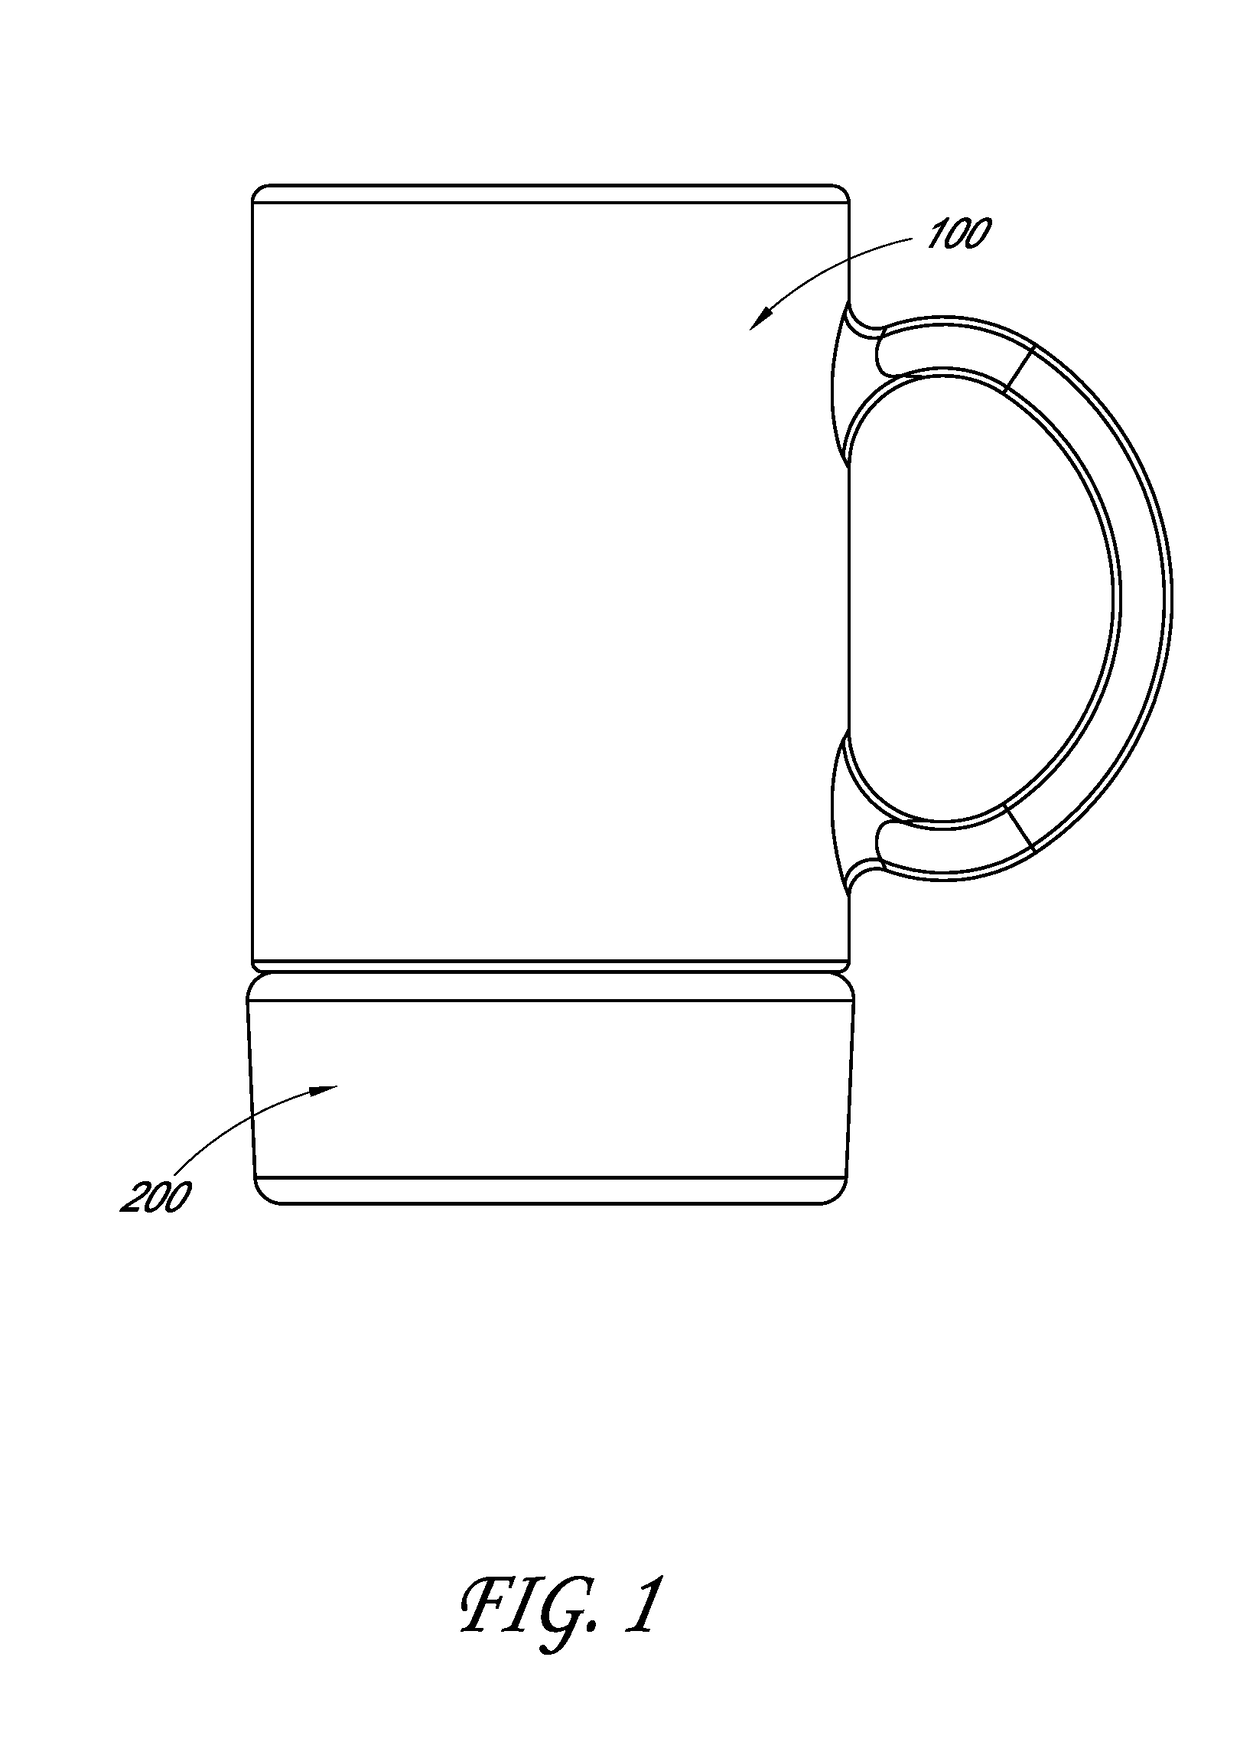 Drinkware and plateware and active temperature control module for same